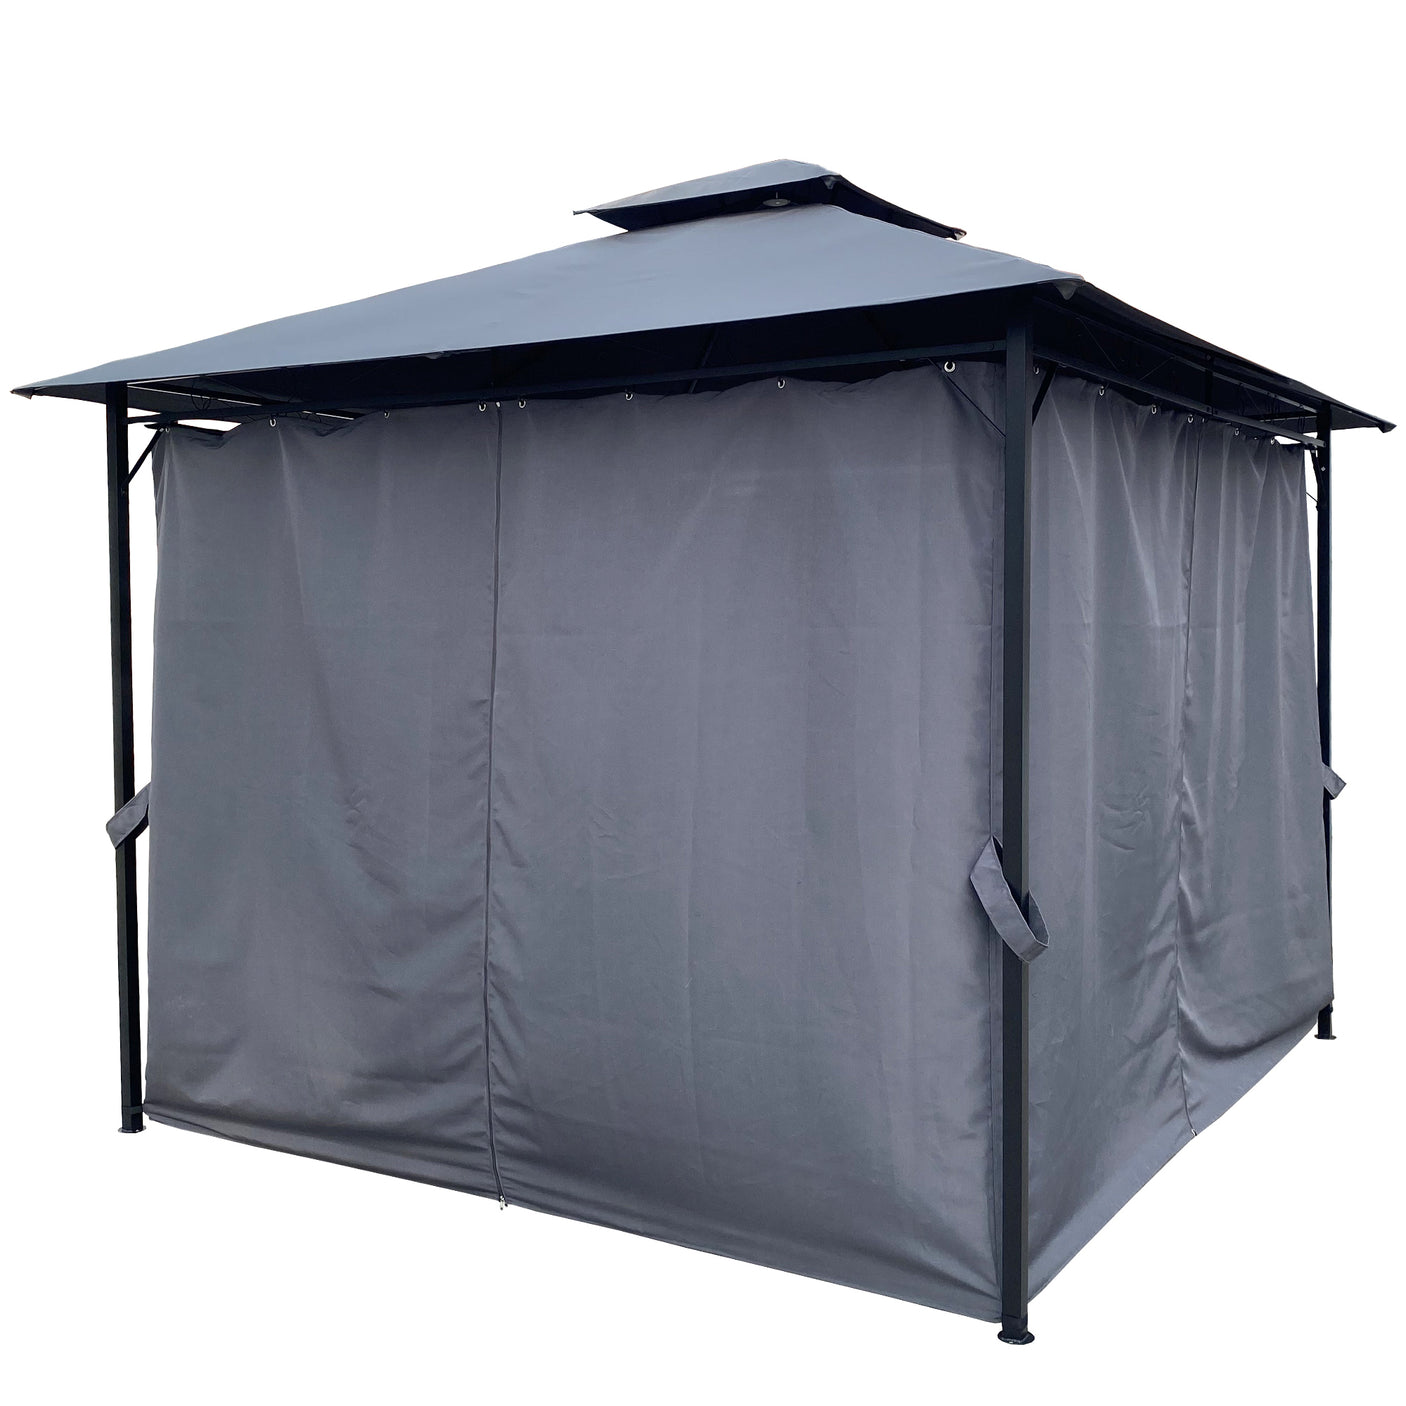 10x10 Ft Outdoor Patio Garden Gazebo Tent, Outdoor Shading, Gazebo Canopy With Curtains,Gray